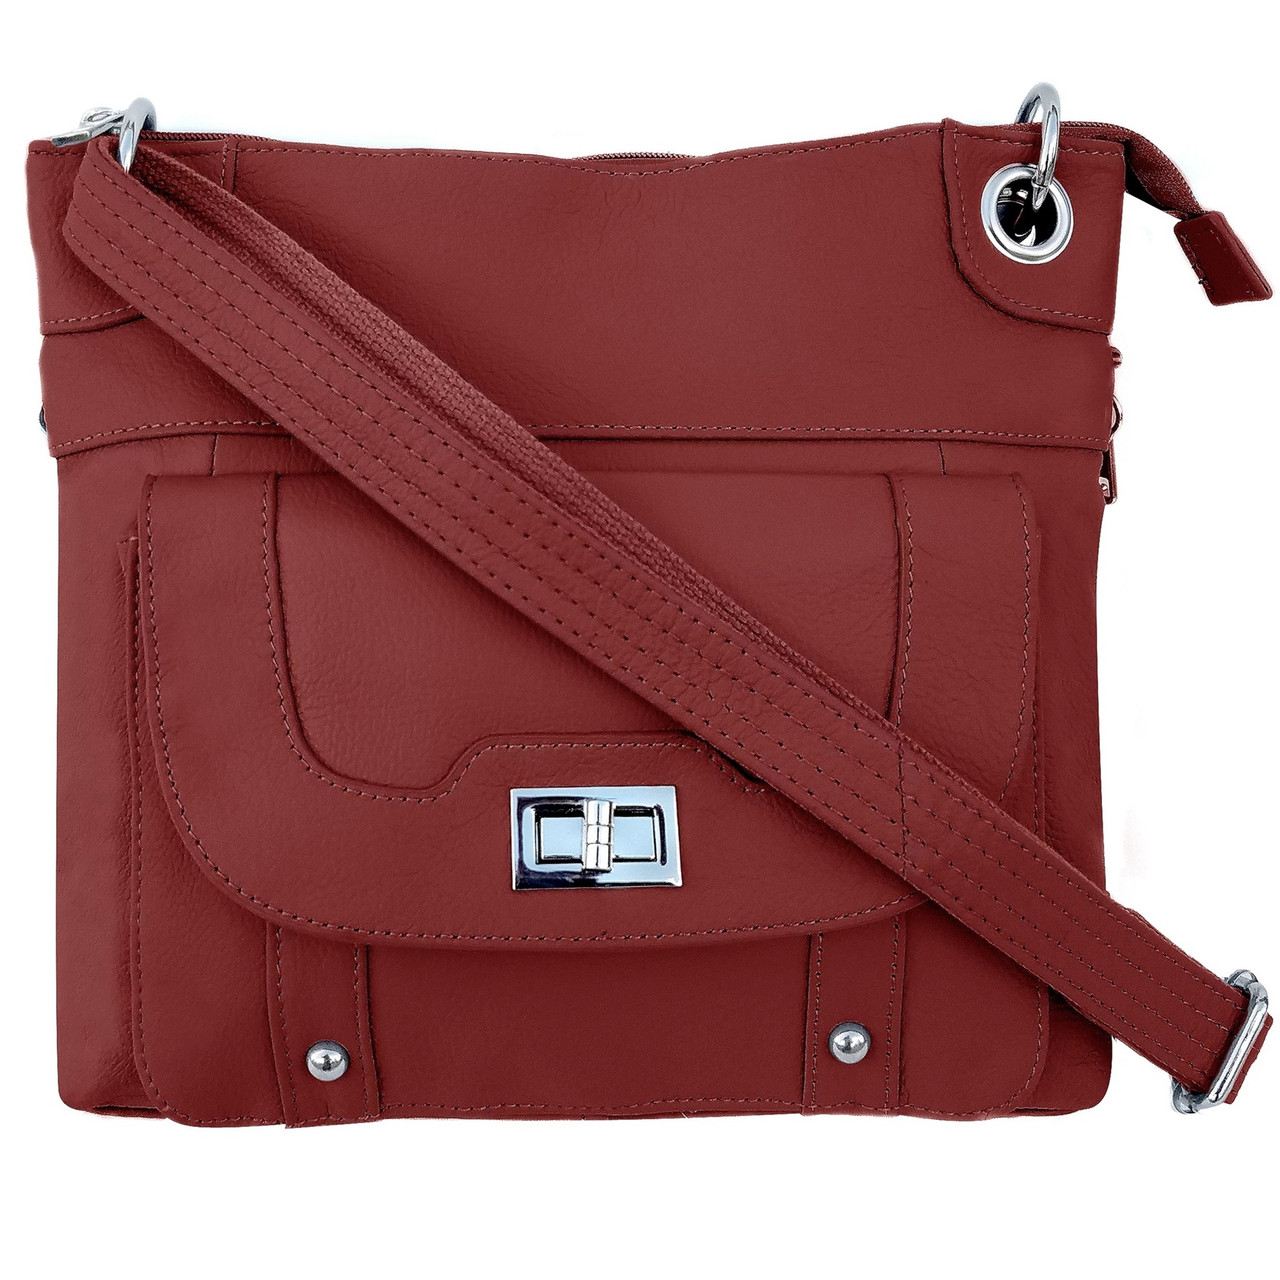 Concealed Carry Purses - Girls With Guns